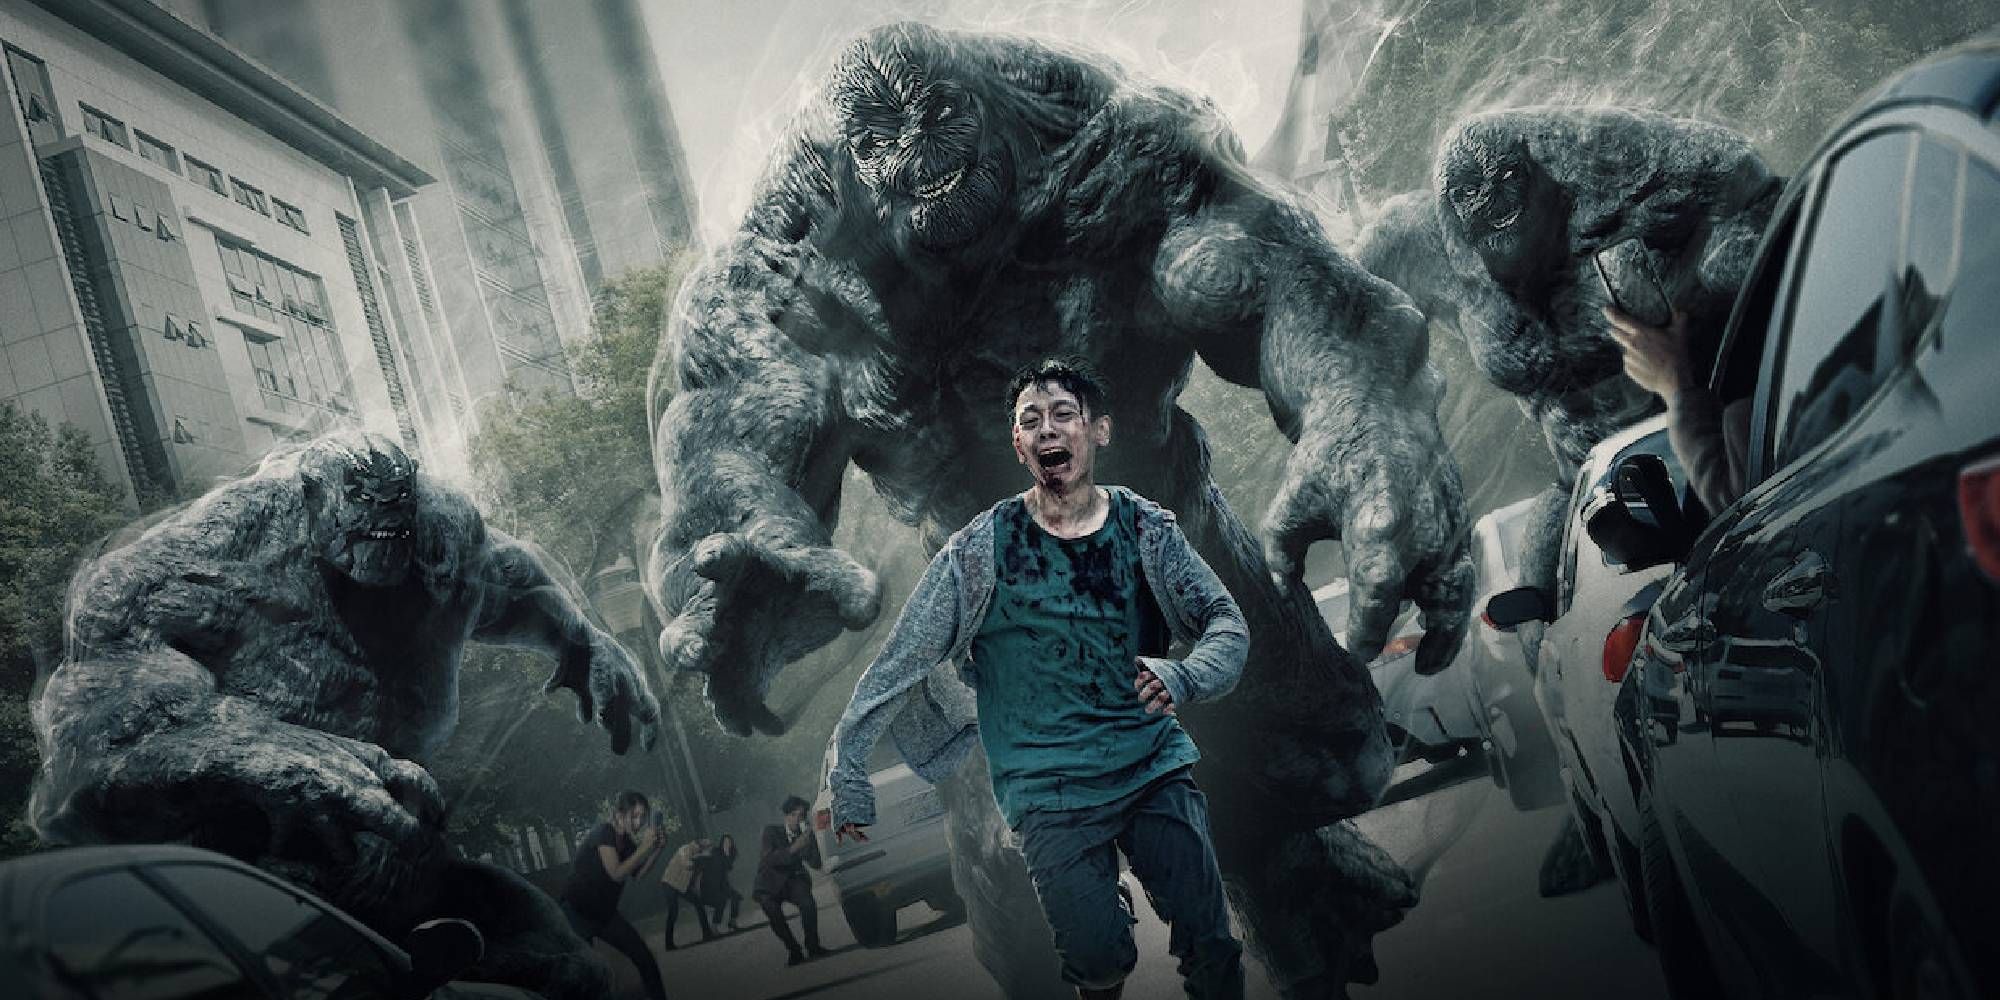 Yoo Ah-In in Hellbound running away from a scary, gigantic creature.